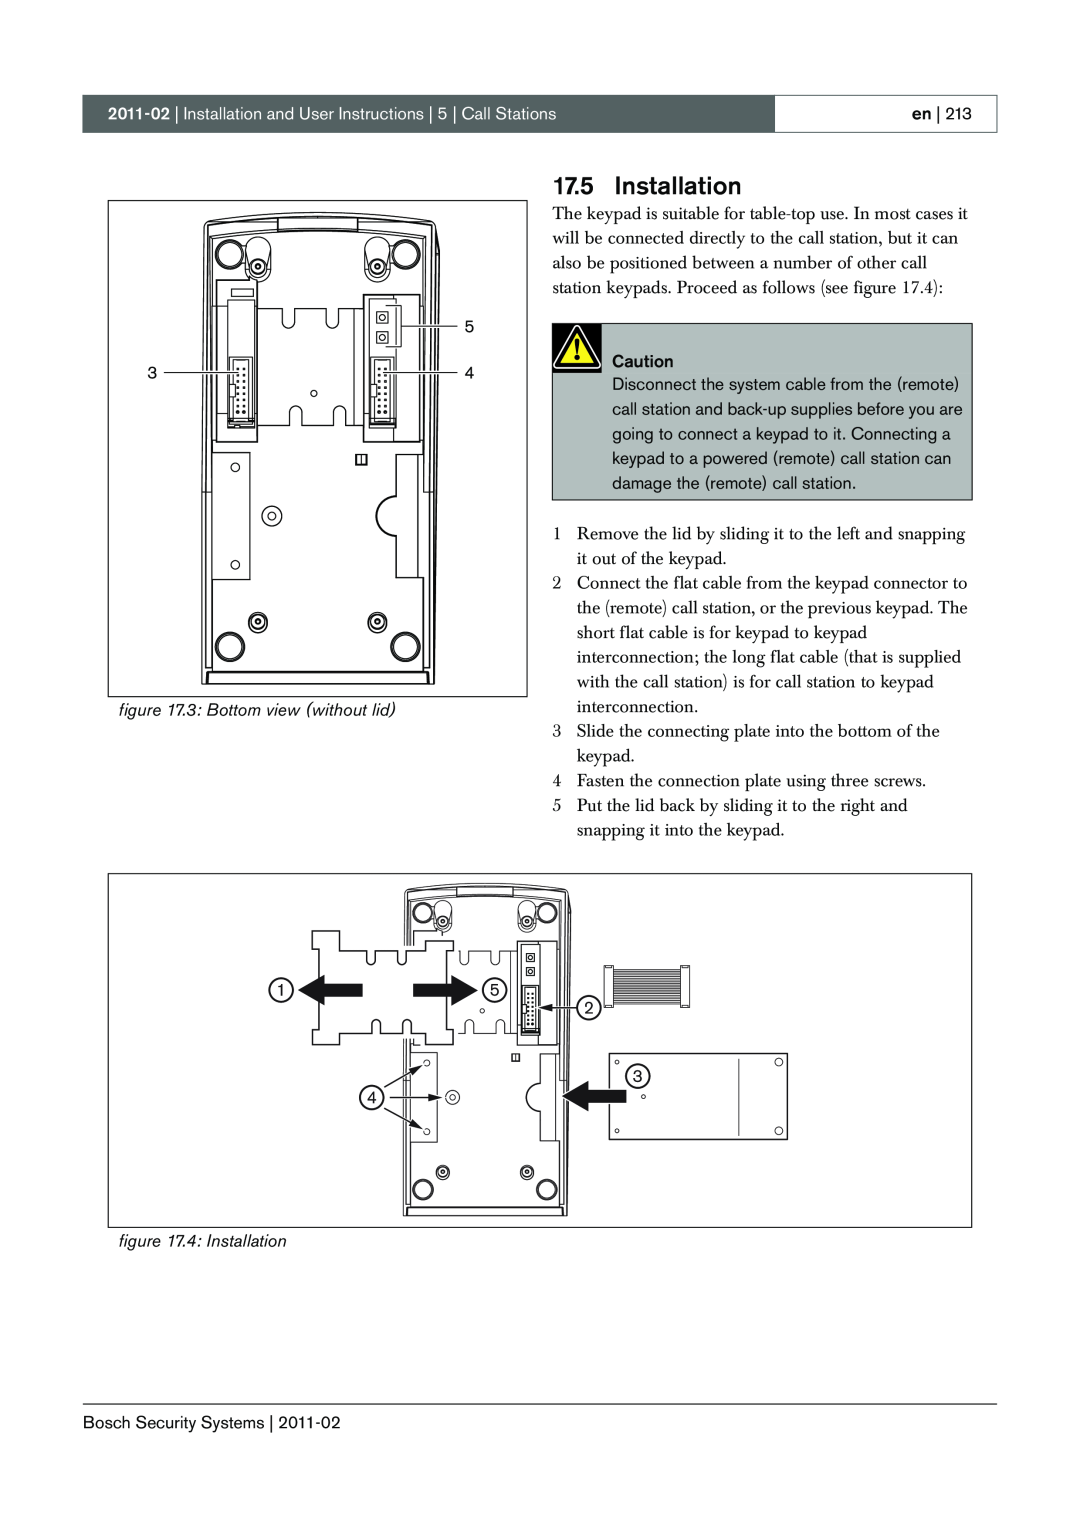 Bosch Appliances 3.5 manual 3: Bottom view without lid, 4: Installation 